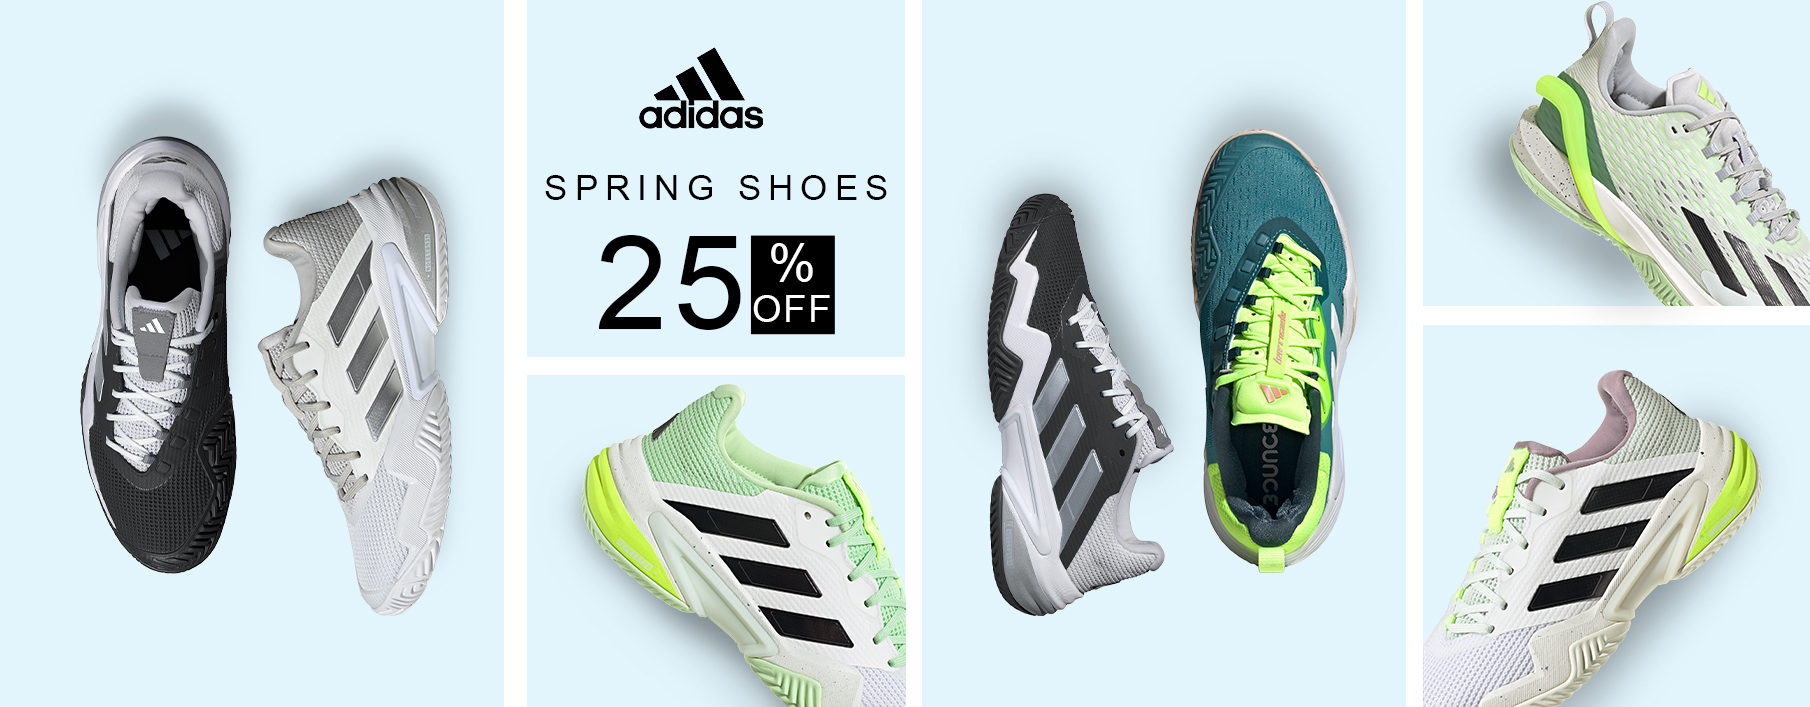 tennis adidas spring sale shoes